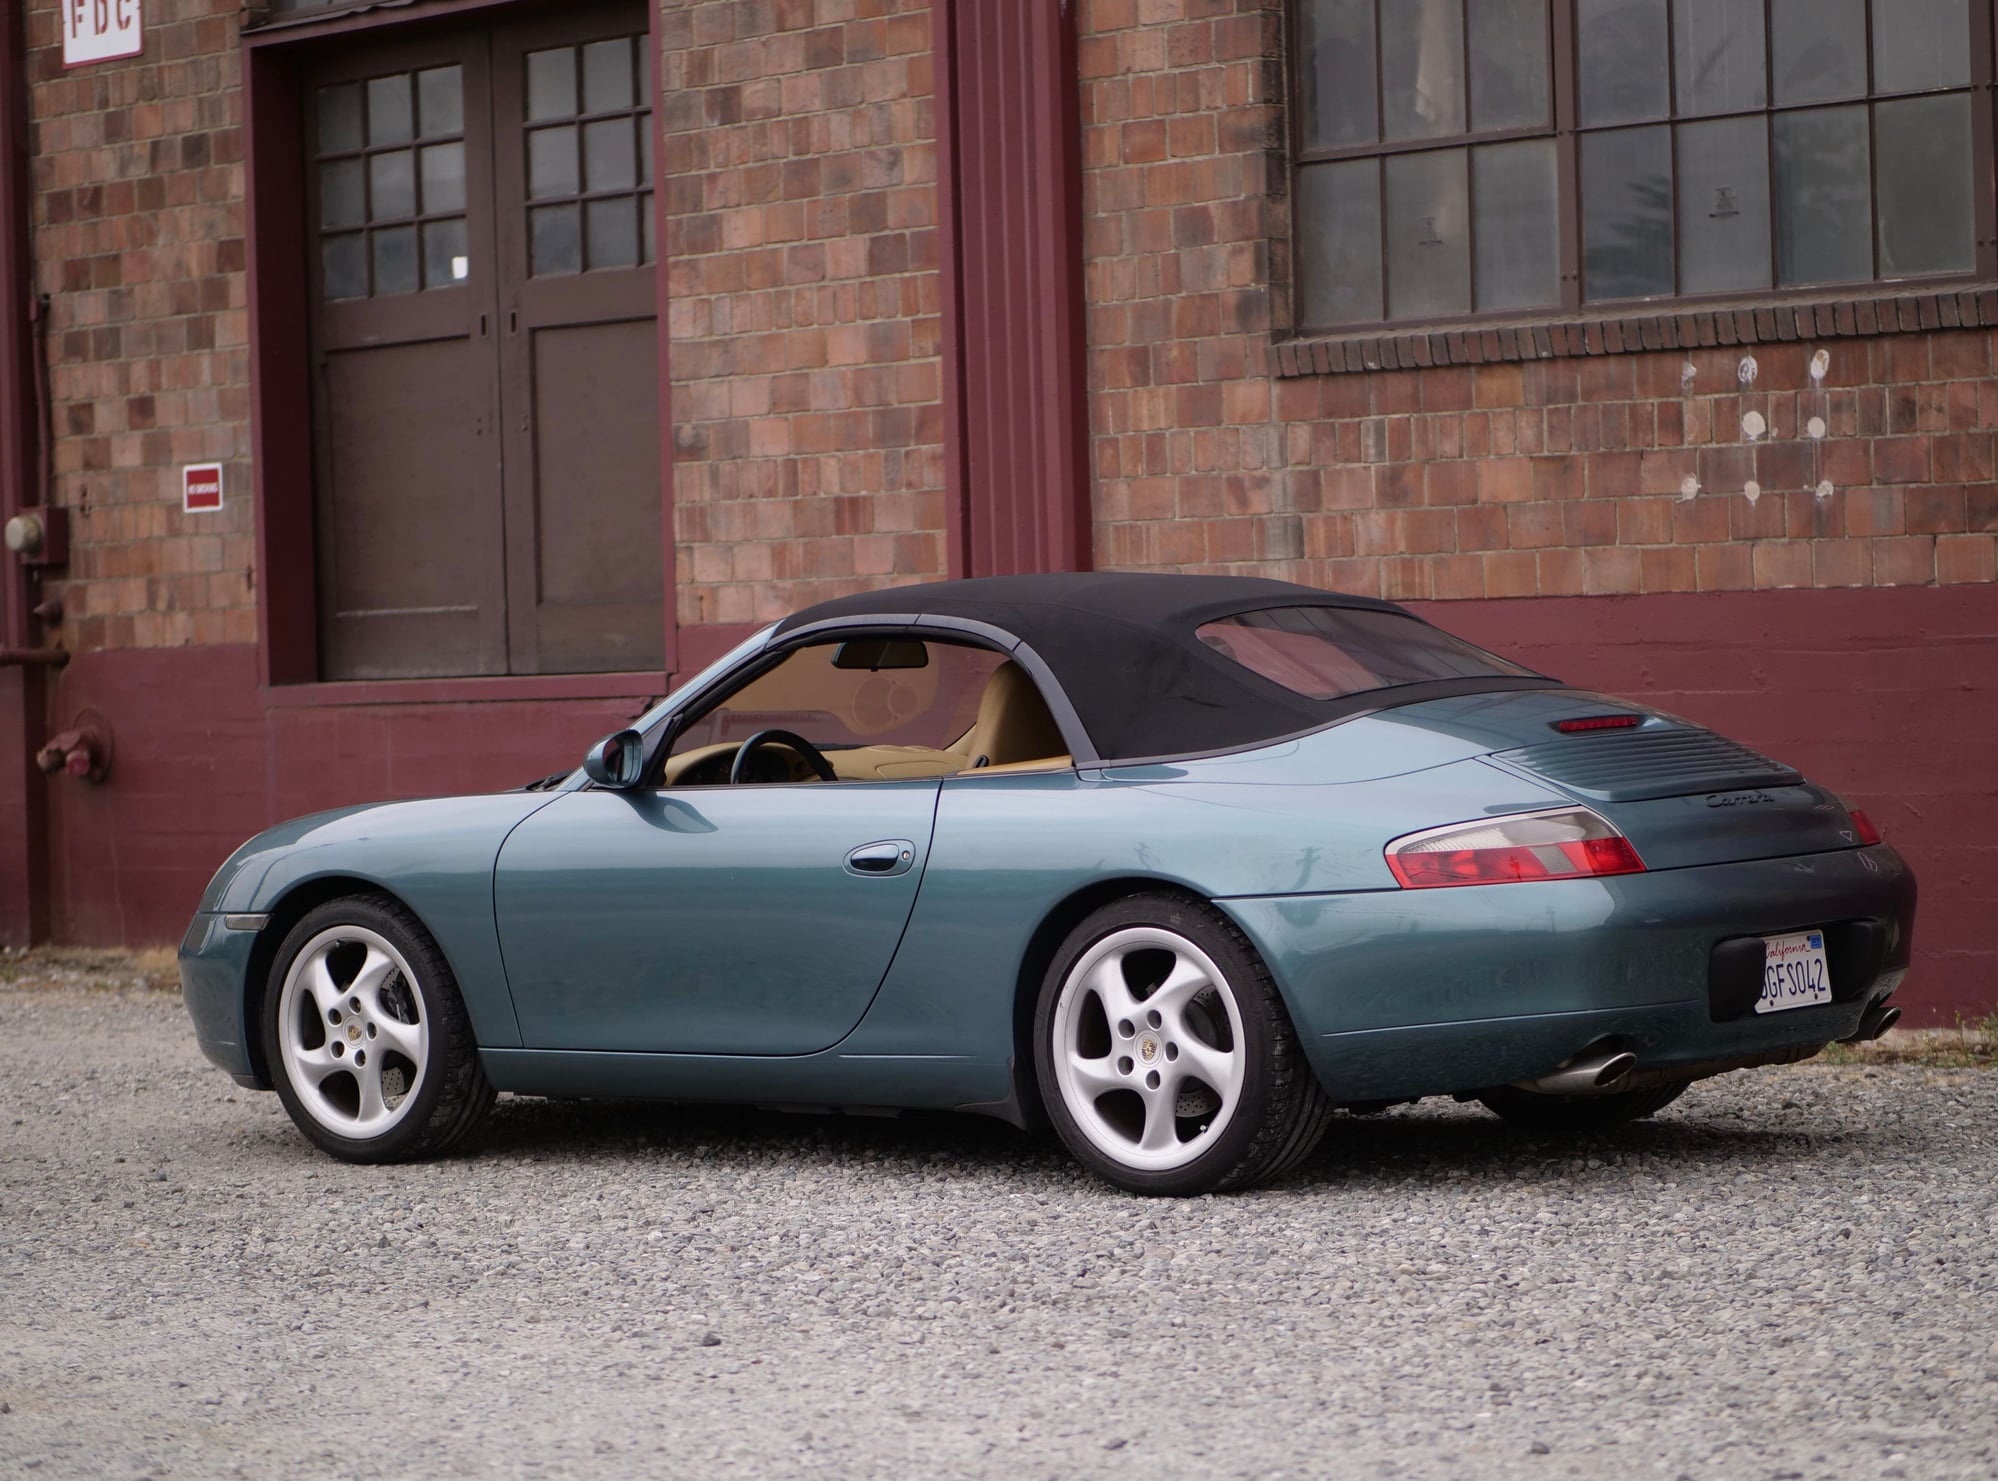 1999 Porsche 911 - 1999 Porsche 996 Cabriolet - Exclusive Program Turquoise Metallic 6-speed 73k miles - Used - VIN WP0CA2995XS652814 - 72,750 Miles - 6 cyl - 2WD - Manual - Convertible - Other - Seattle, WA 98134, United States